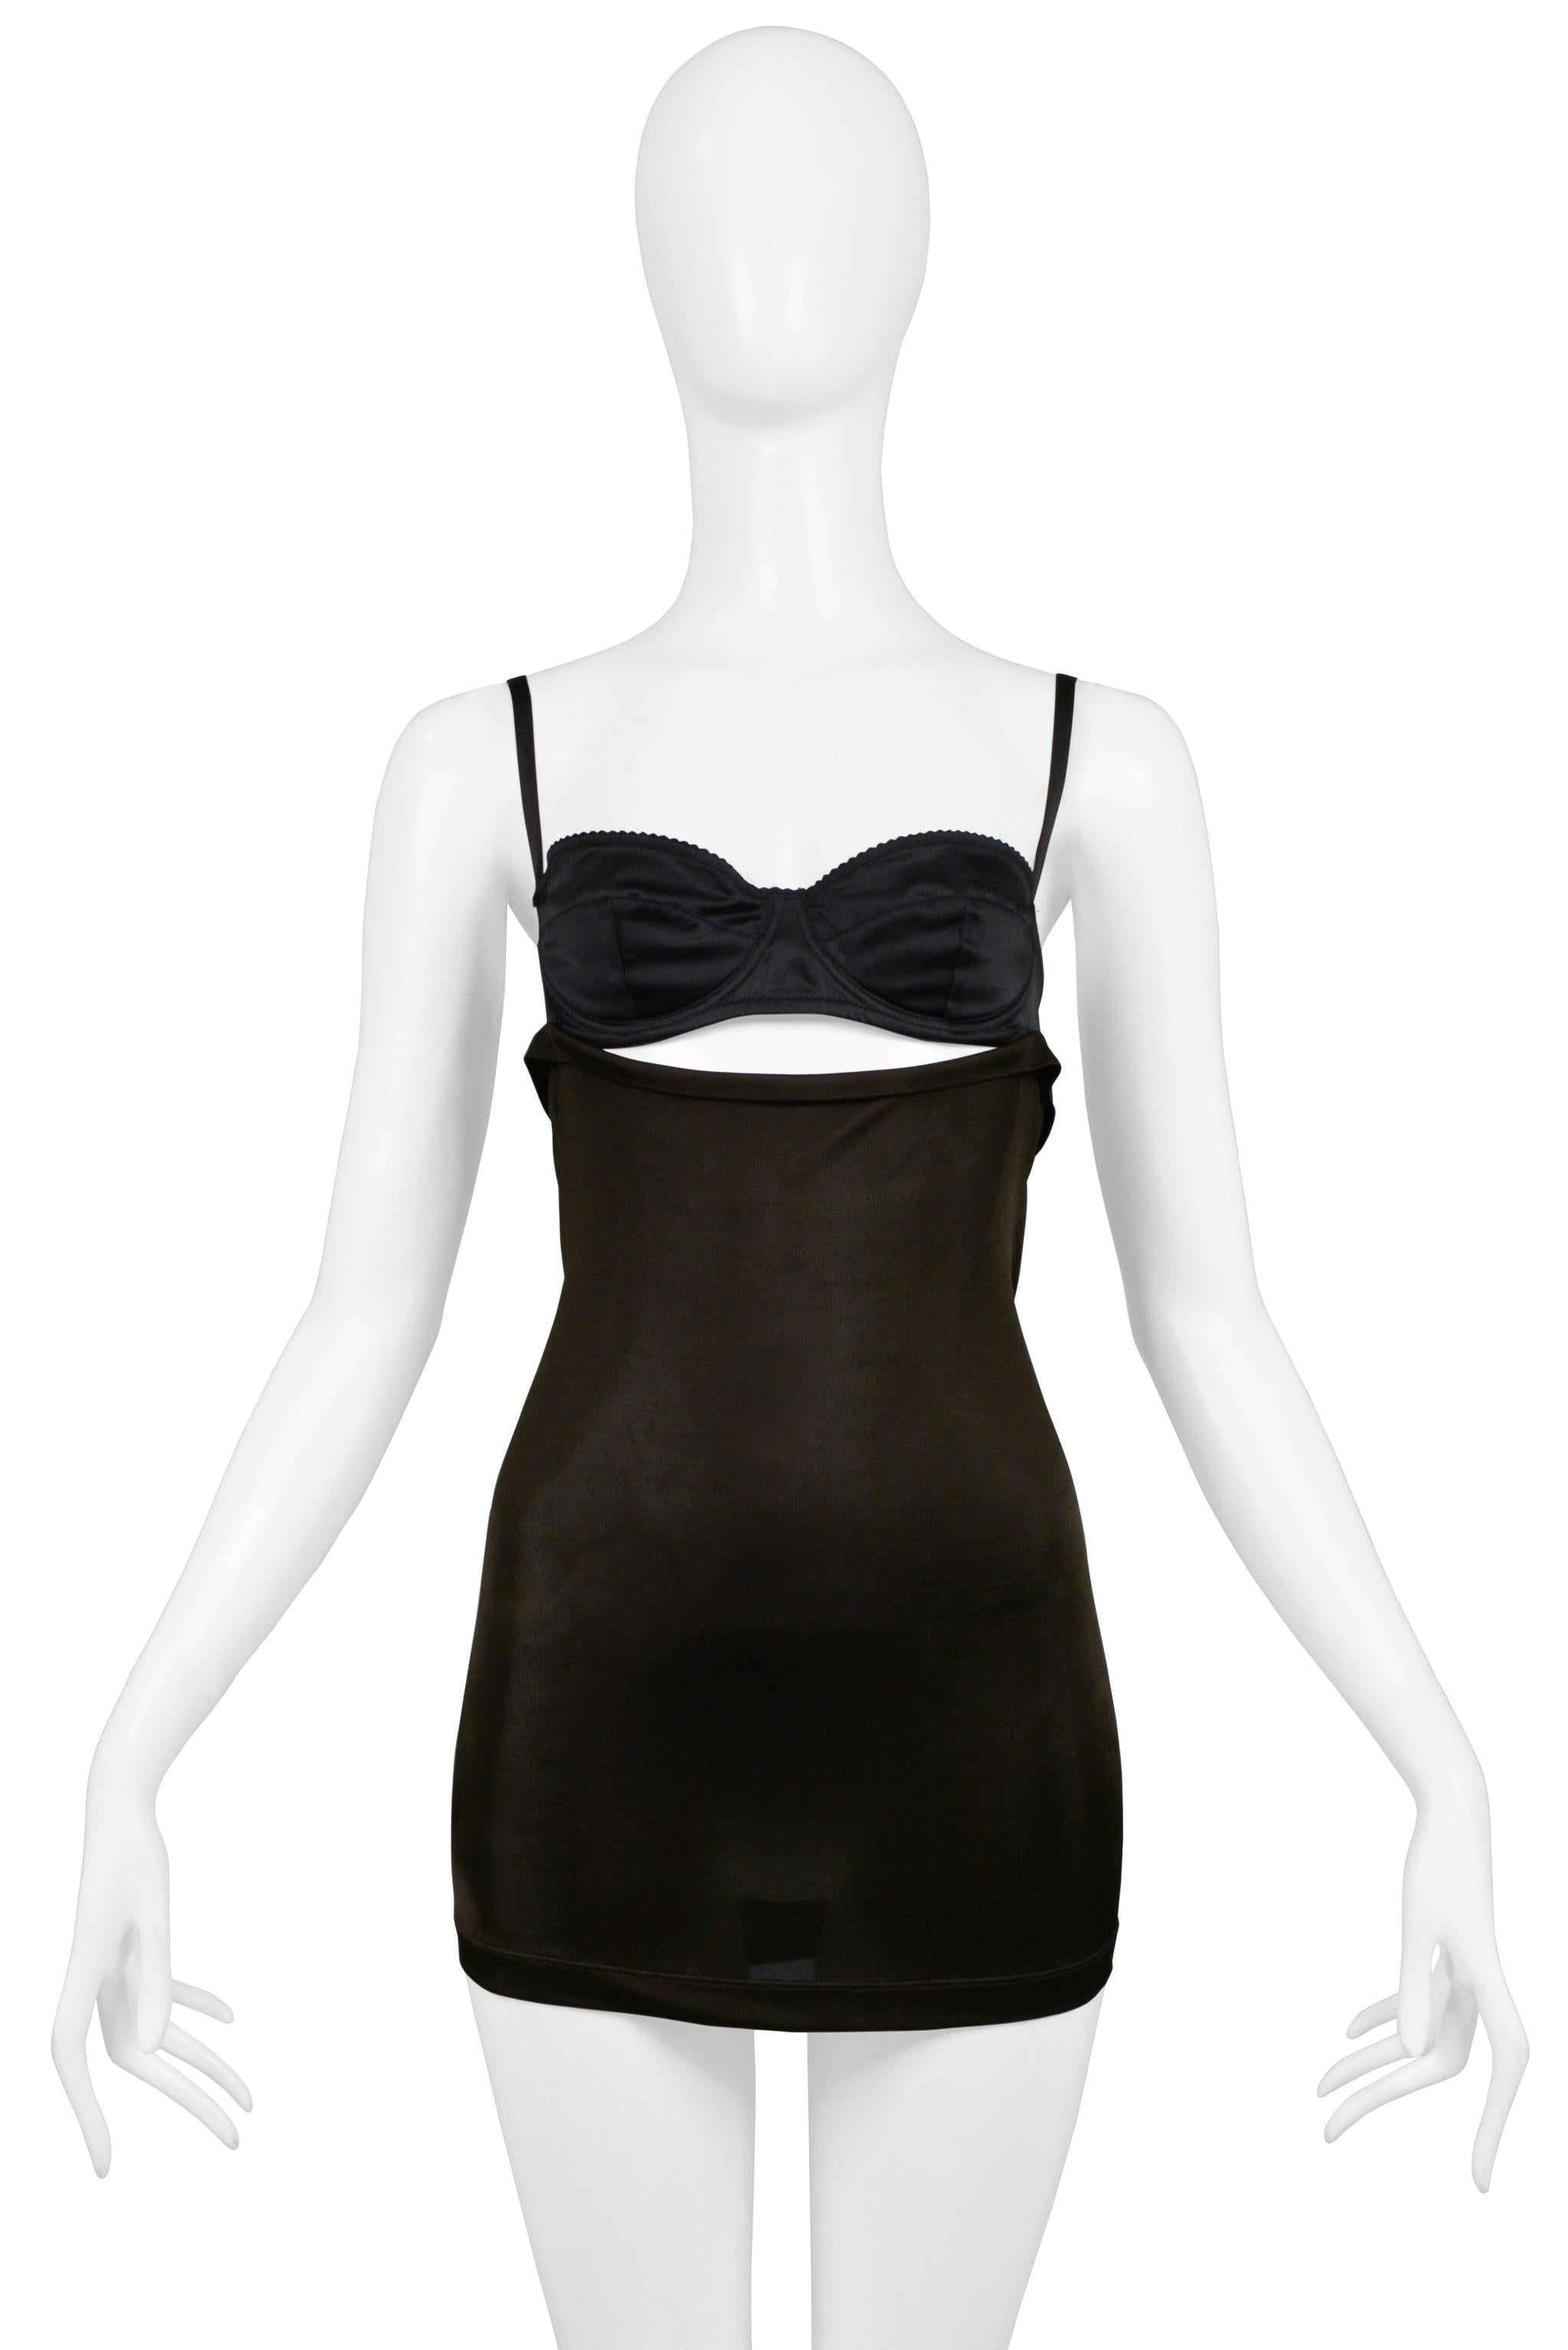 Resurrection Vintage is excited to offer a vintage Dolce & Gabbana cutout mini dress featuring a black bra top with adjustable straps and an attached brown slinky jersey skirt with a gathered back.

Dolce & Gabbana
Size 40
Silk Jersey, Satin
Very